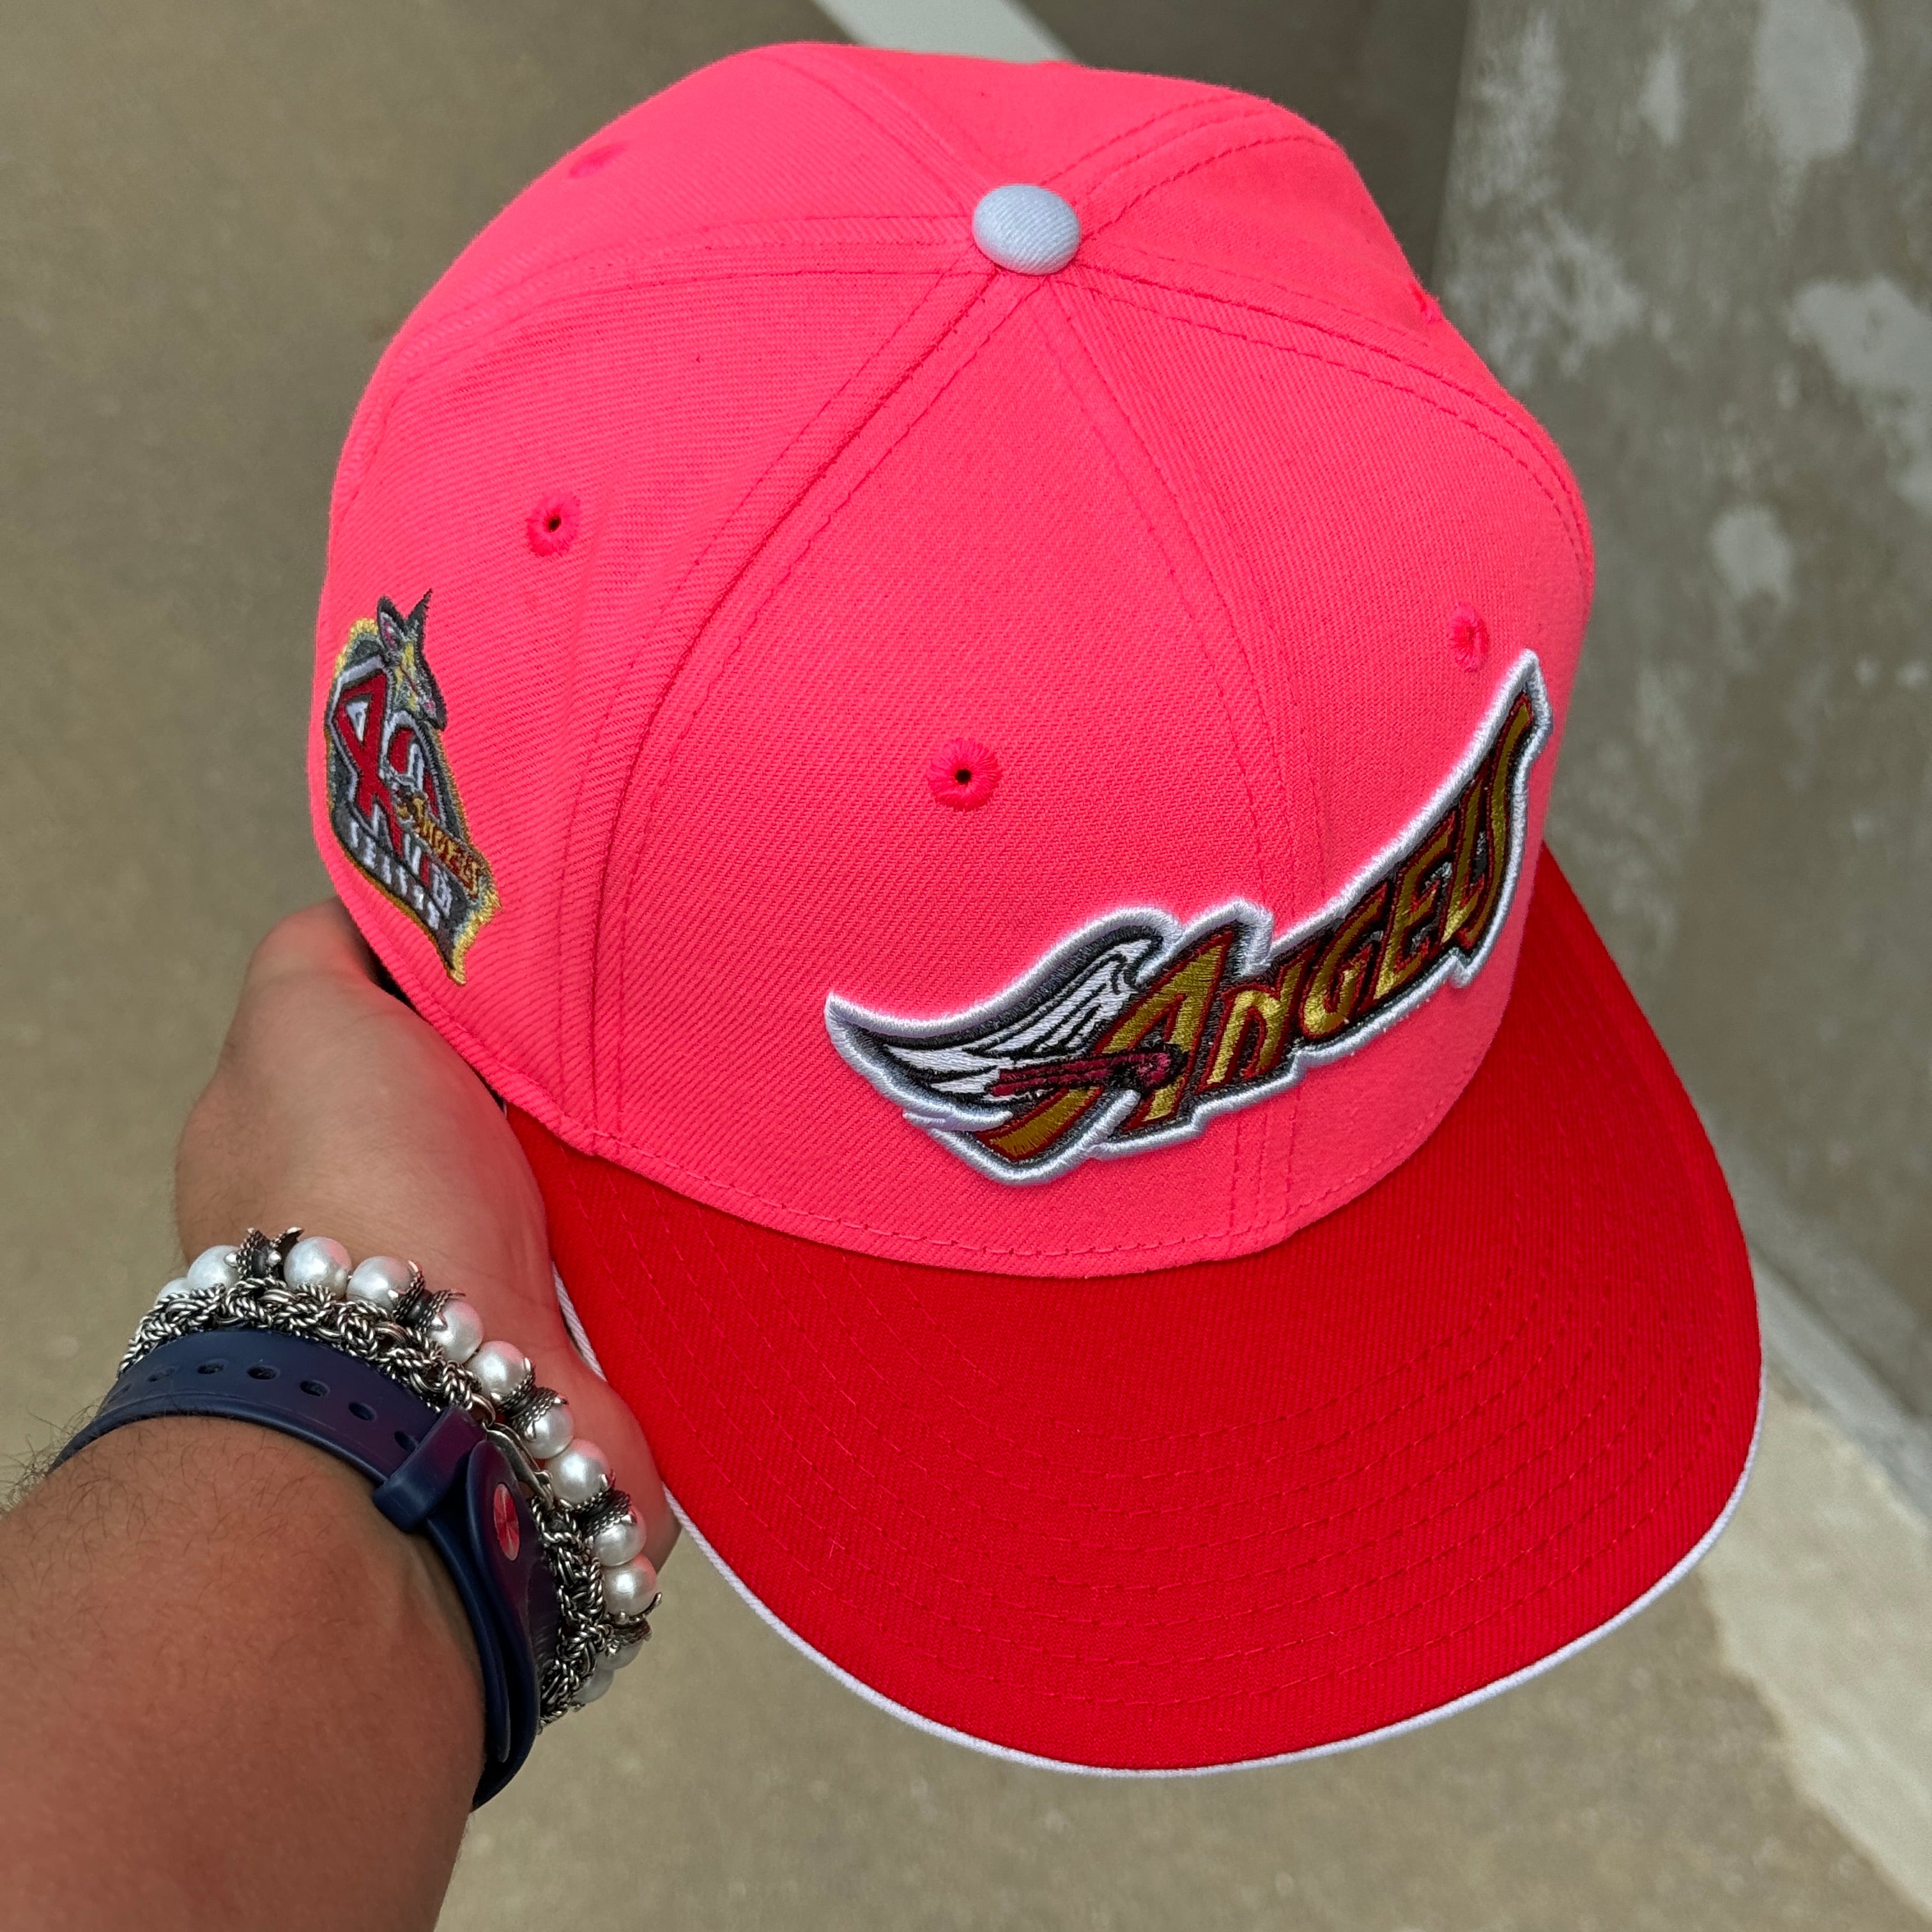 USED 1/8 Pink Los Angeles Angels 40th Season 59fifty New Era Fitted Hat Cap